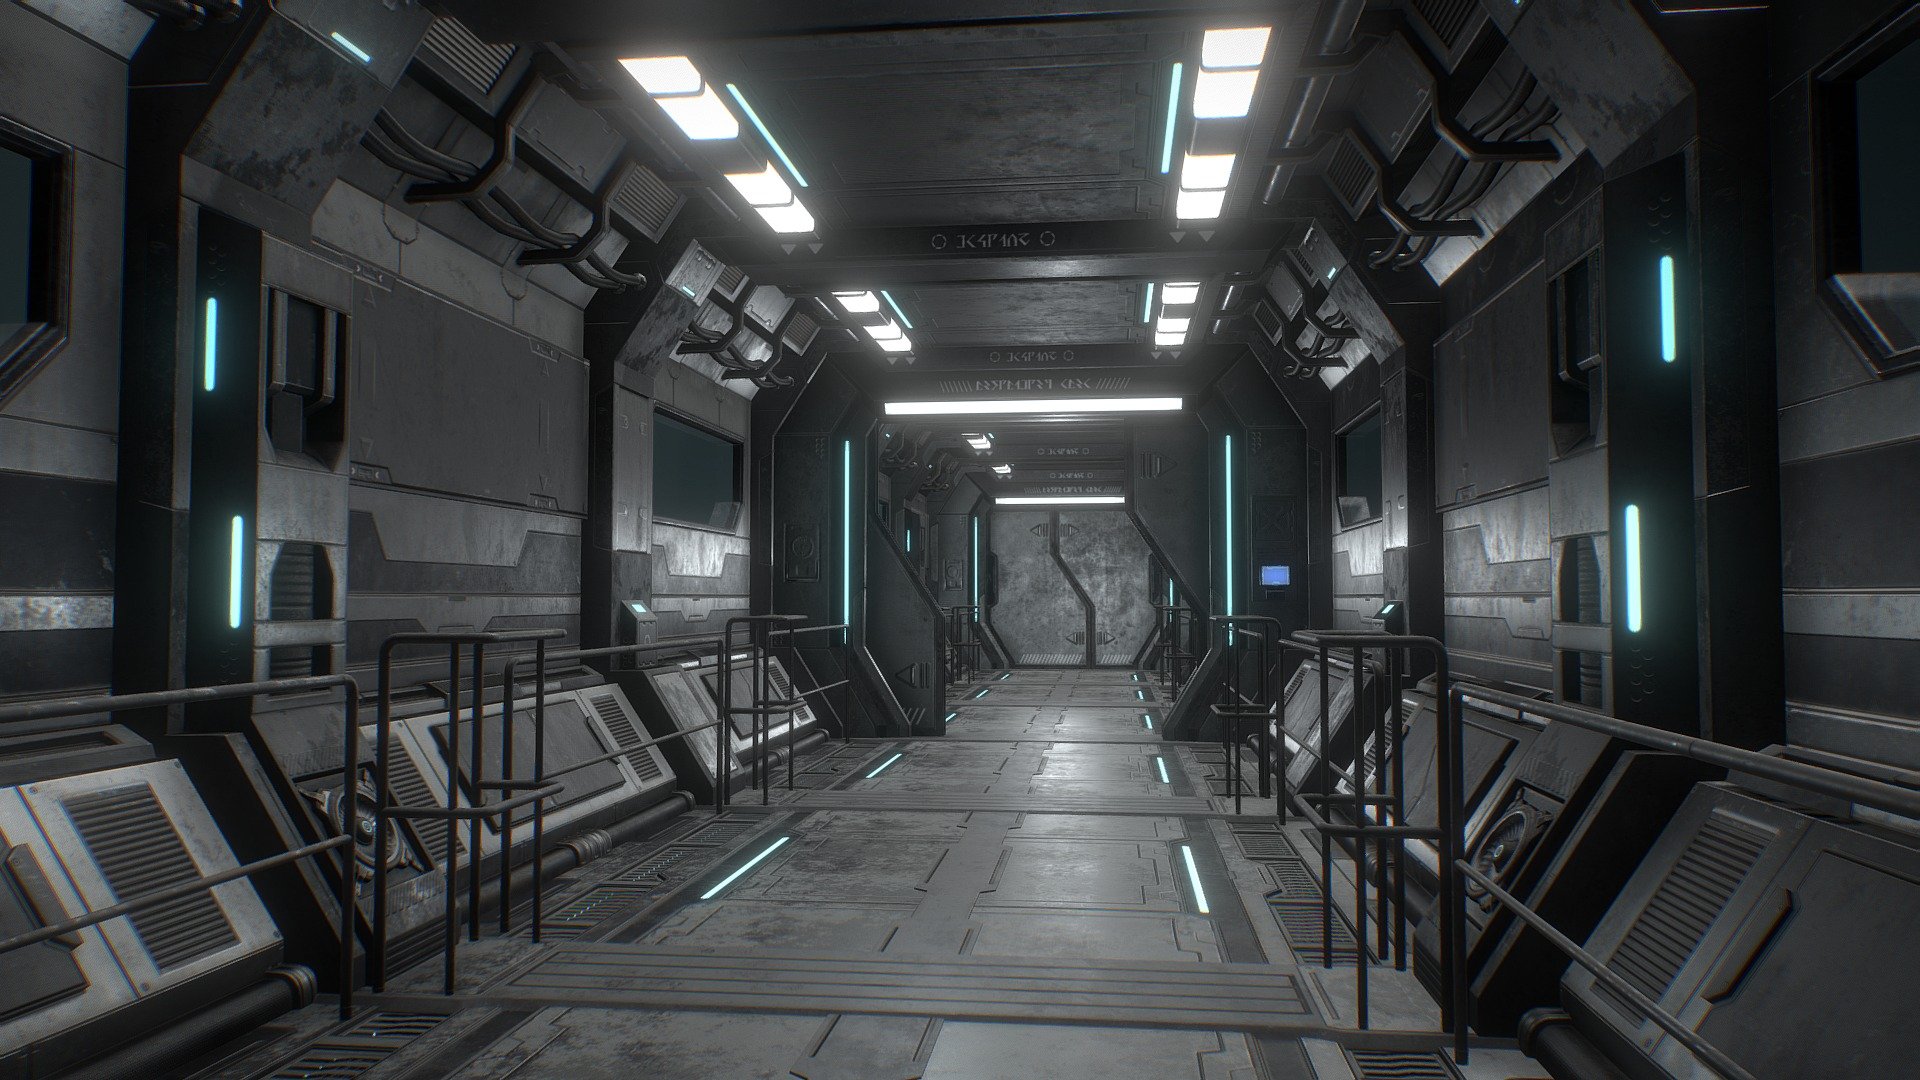 This pack includes my Sci-Fi Modular corridor + Sci-Fi Door:




Created with 3ds Max

Textured in Substance Painter

The unit of measurement used for the model is centimeters

5 PBR Materials with 4k textures including: Albedo, Normal, Metalness, Roughness, Occlusion, Emissive, Opacity.

Full set includes:




Wall (with the option of adding panel or window)

Floor

Ceiling

Separator

Separator Ceiling

Separator Floor

Fan (optional, to add to separator)

Railing (also optional)

Door (separated in 3 parts, ready to animate)

Polys of parts: 2.291 (4.490 tris).
Polys of scene: 17.790 (35.088 tris)

Files included:




Sci-Fi Modular Corridor with Door: Full scene

Sci-Fi Modular Door: Door separated

Sci-Fi Modular Corridor Parts: All parts separated to build your own corridor

Formats included: MAX / BLEND / FBX / OBJ / 3DS

This model can be used for any game, personal project, etc. You may not resell any content - Sci-Fi Modular Corridor & Door Ver.1 - Low Poly - Buy Royalty Free 3D model by MSWoodvine 3d model